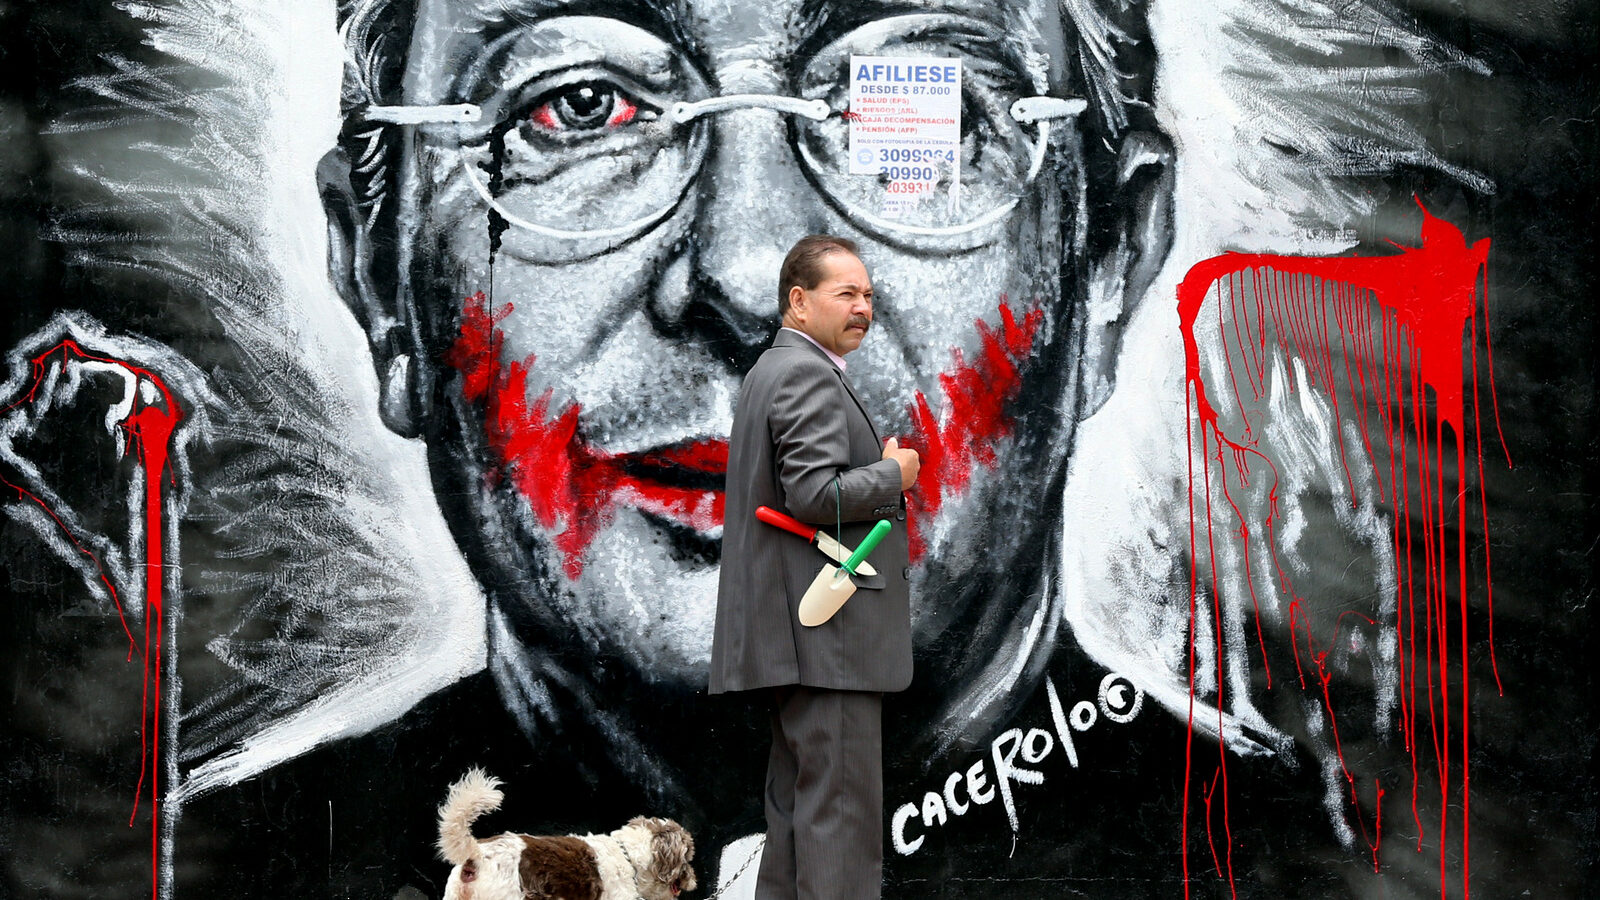 In this March 18, 2015 photo, a man walks his dog next to a mural depicting former President Alvaro Uribe, in Bogota, Colombia.